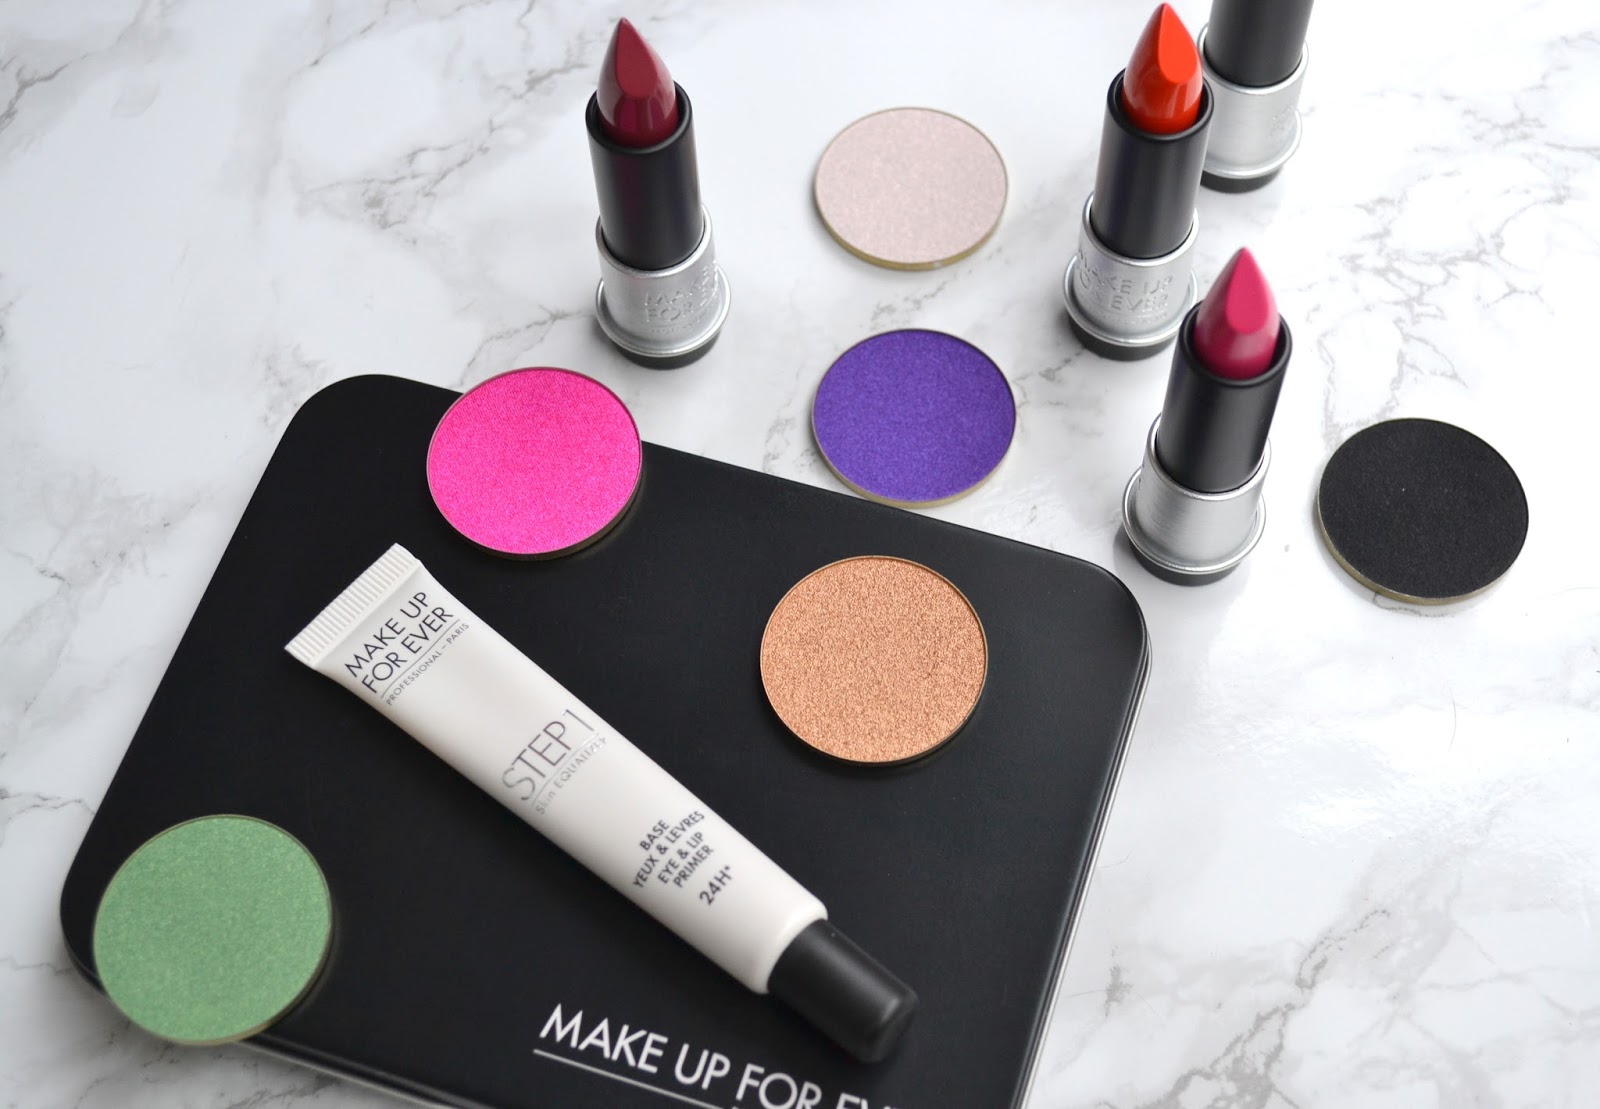 Review: Make Up For Ever Step 1 Skin Equalizers - Makeup Your Mind